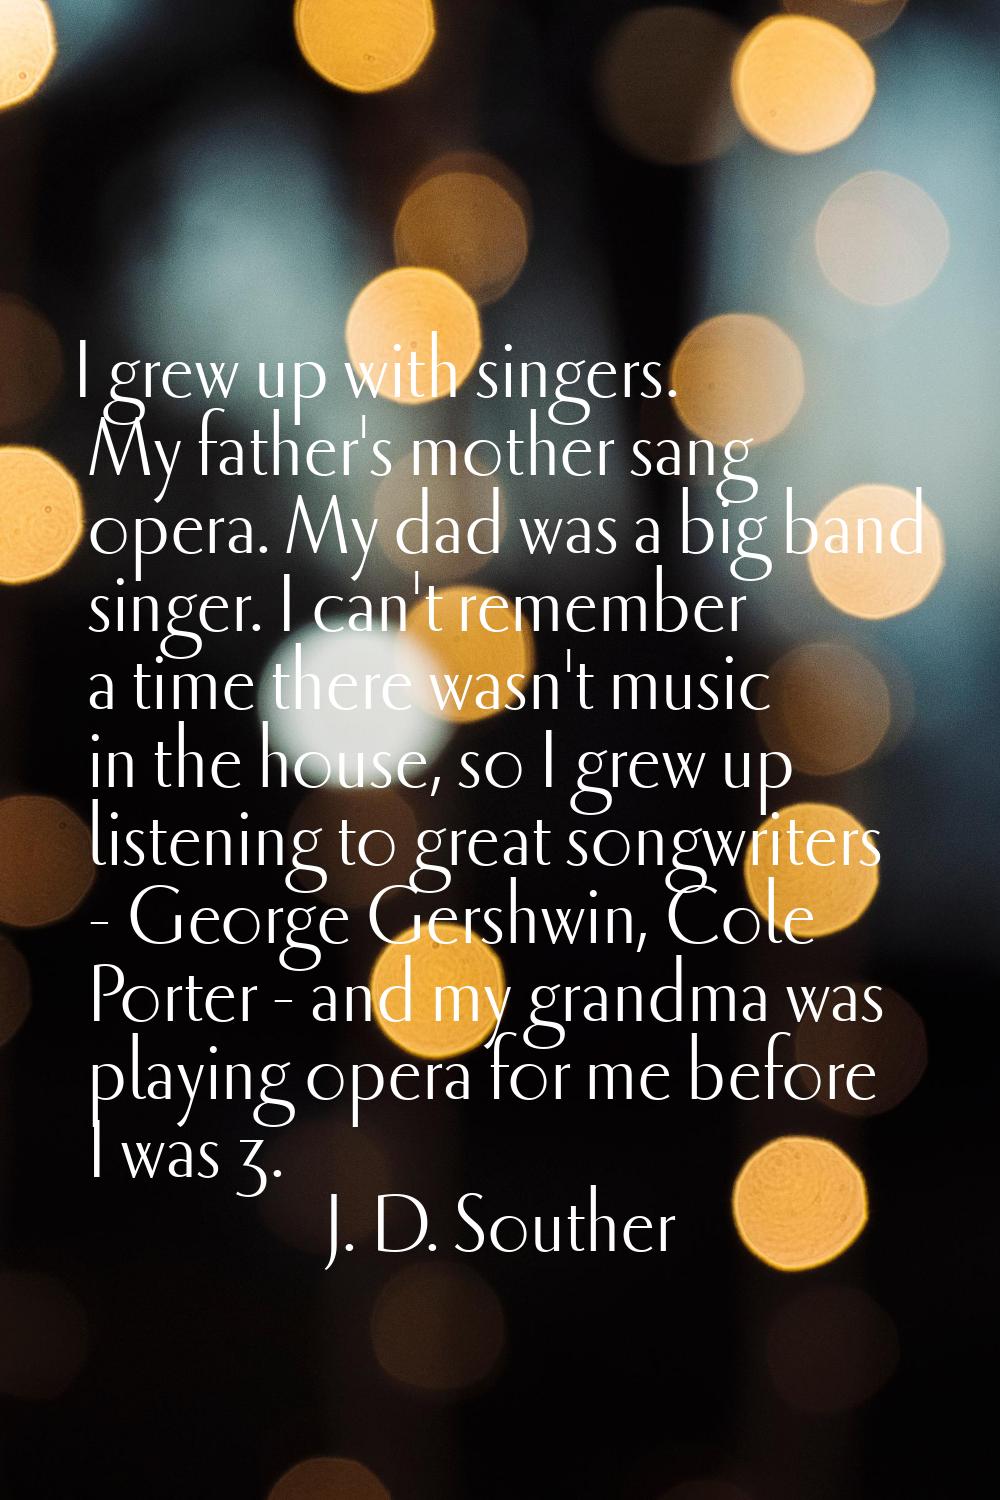 I grew up with singers. My father's mother sang opera. My dad was a big band singer. I can't rememb